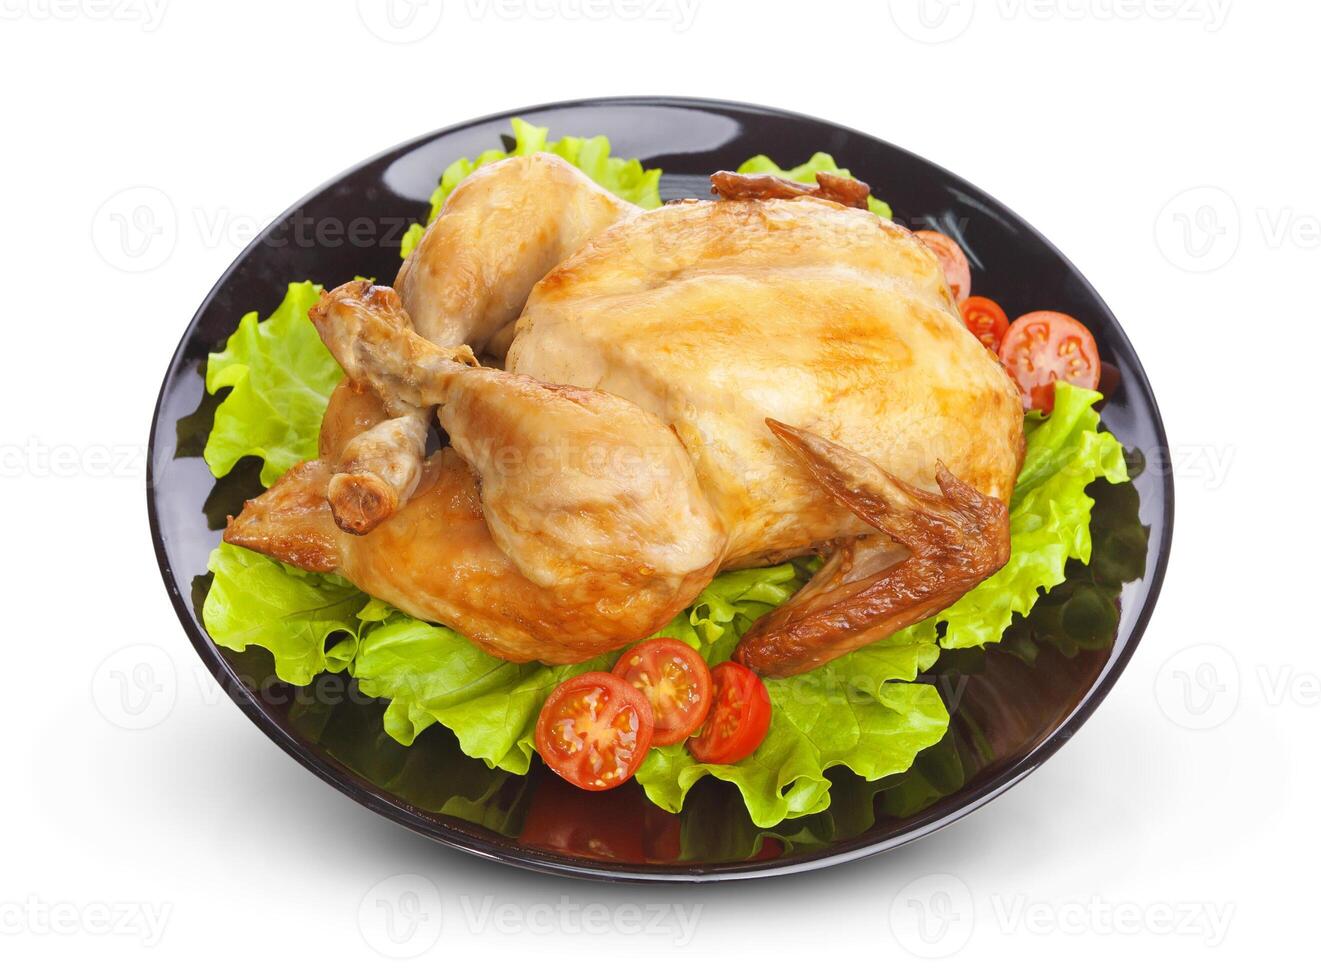 Roasted chicken on white plate photo